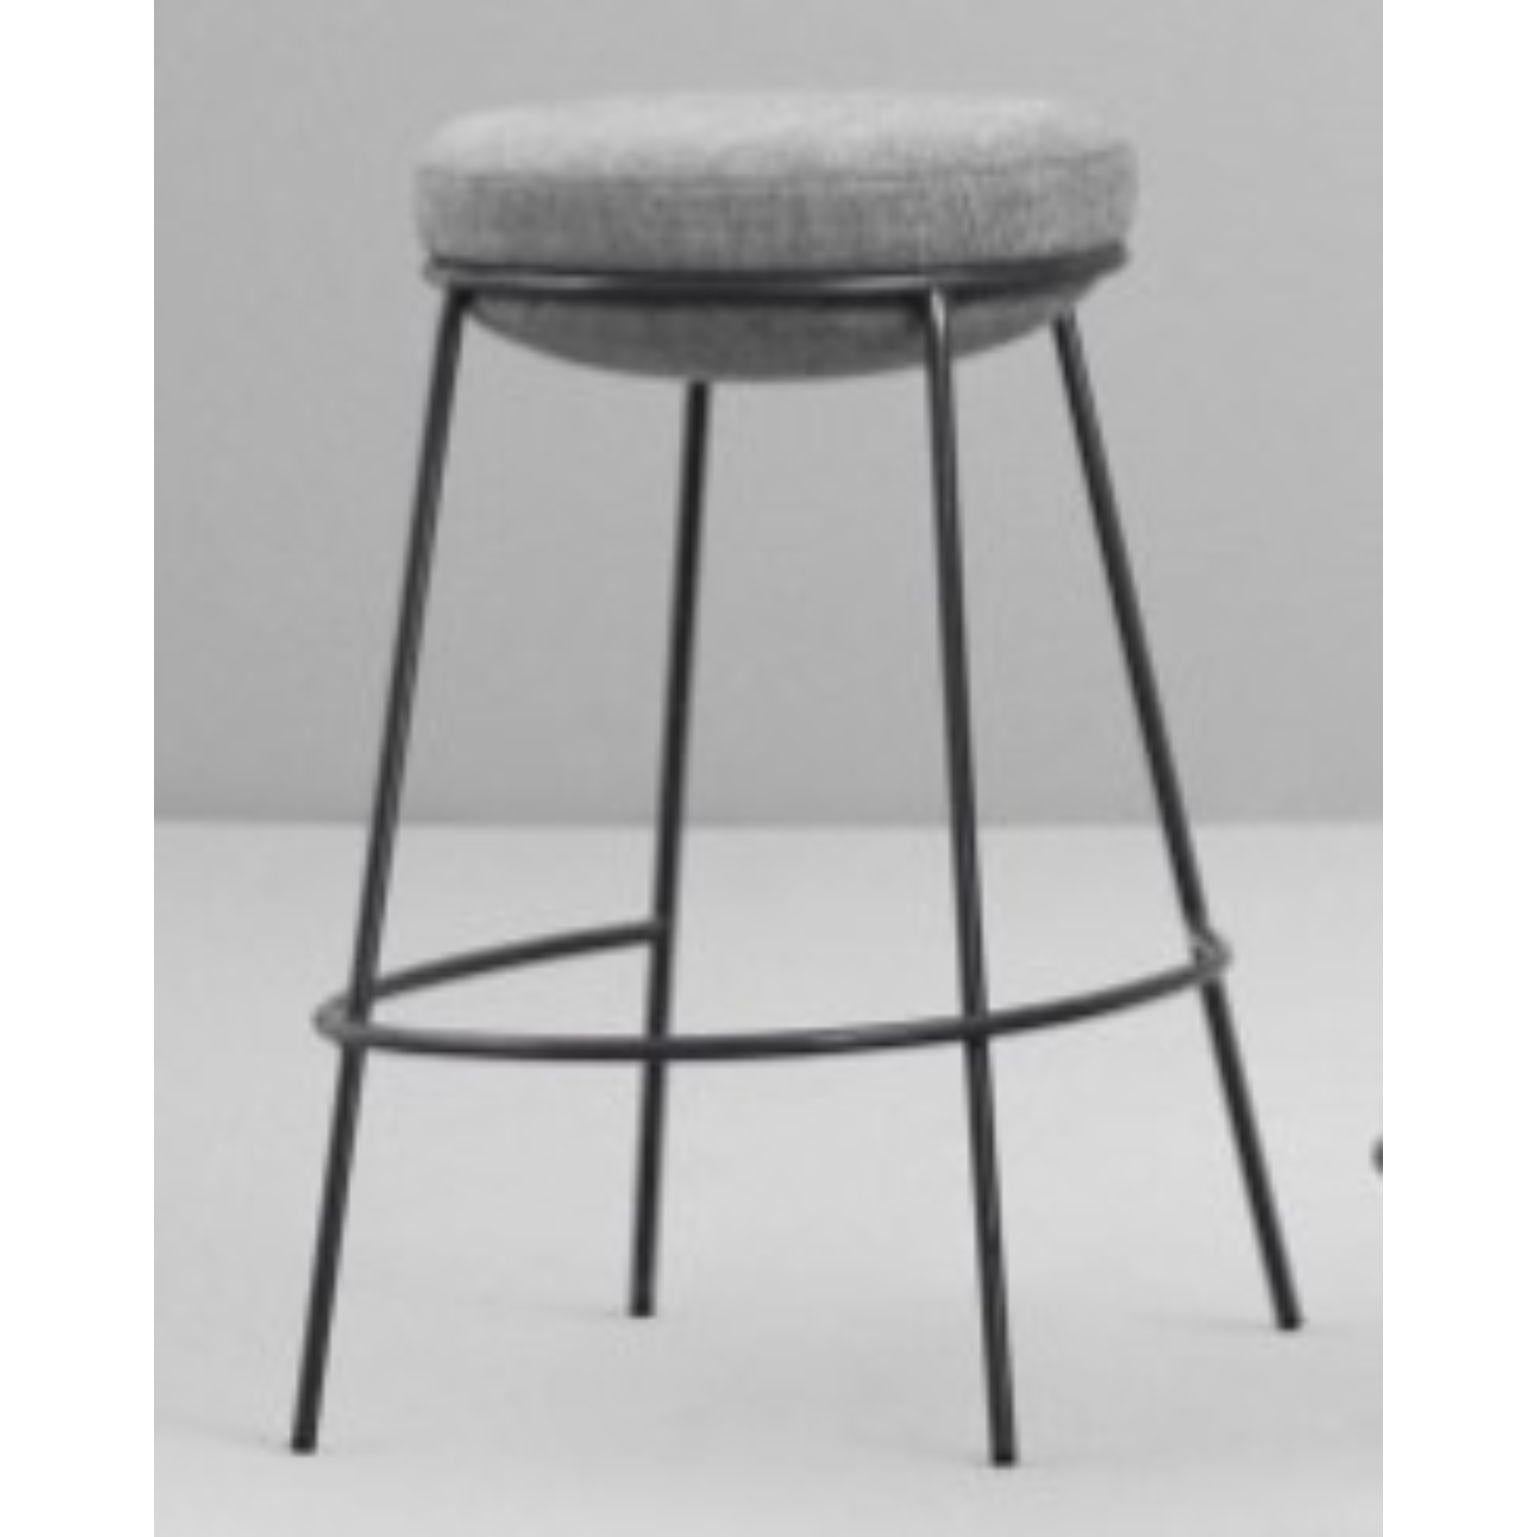 Nest stool without backrest by Pepe Albargues
Dimensions: W48, D57, H92, Seat74
Materials: Iron structure and MDF board
Foam CMHR (high resilience and flame retardant) for all our cushion filling systems
Painted or chromed legs
Copper